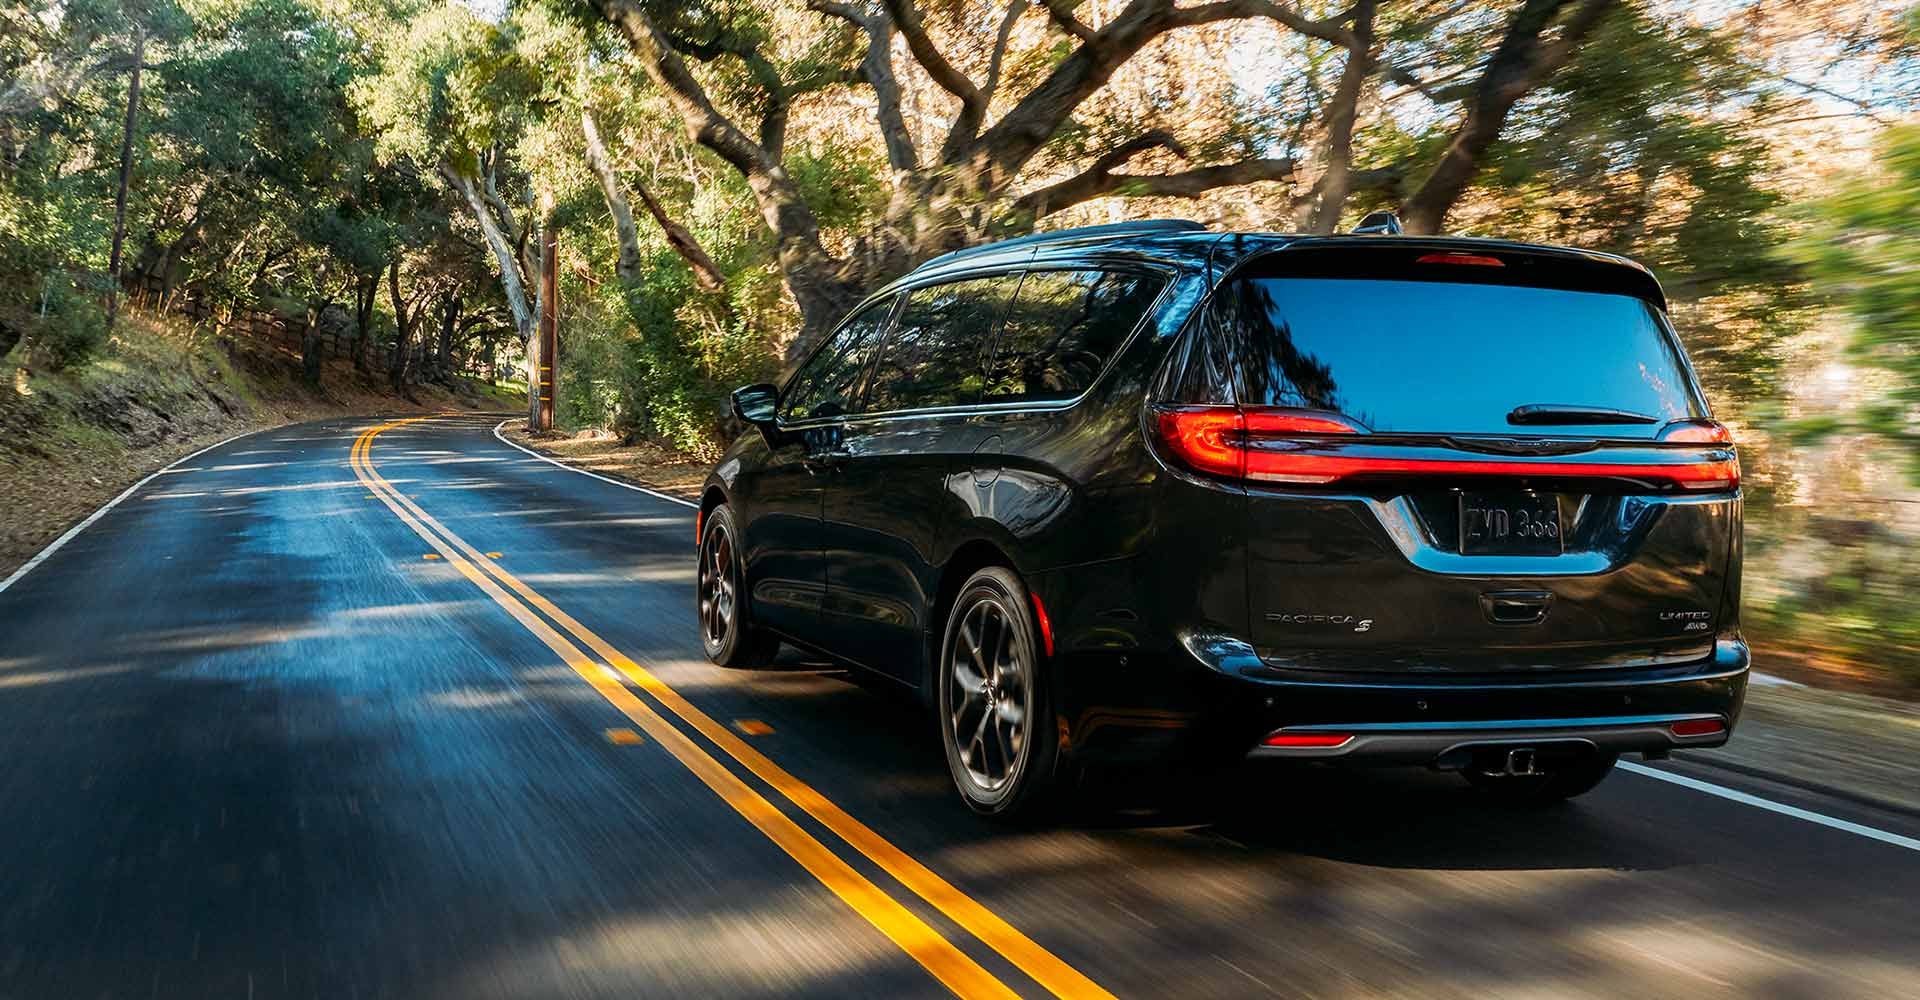 2021 Chrysler Pacifica configurations